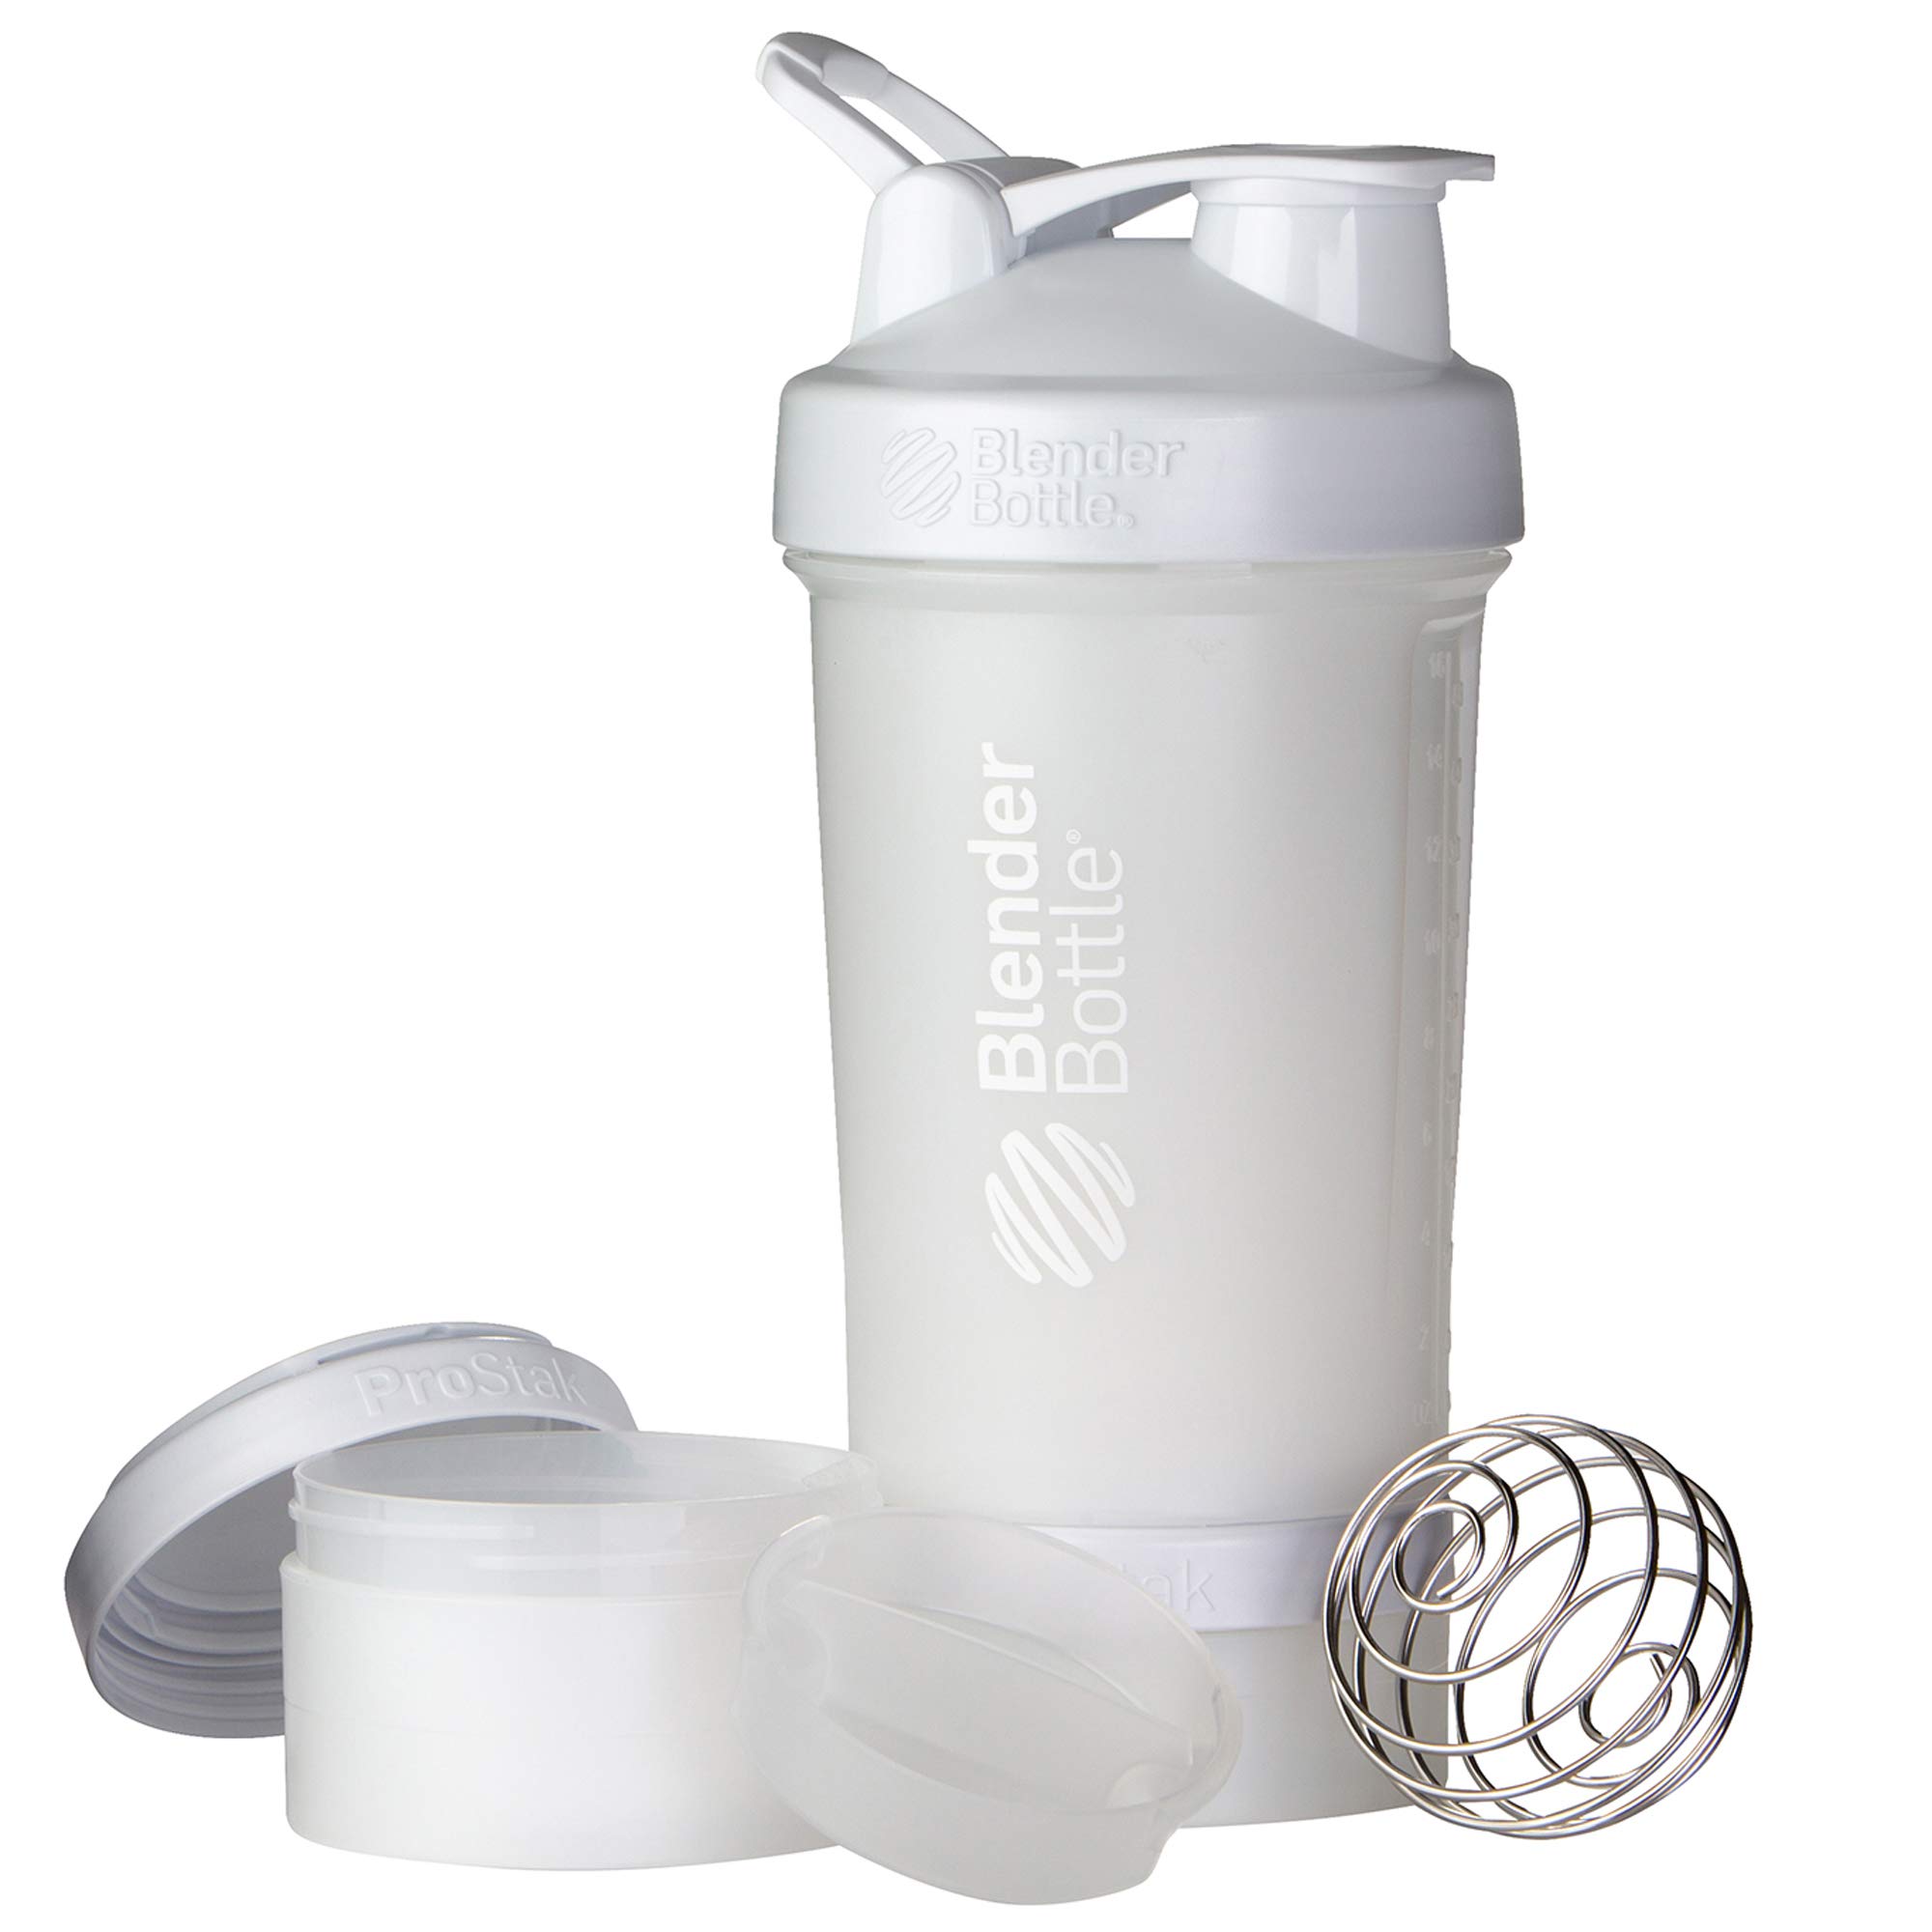 BlenderBottle GoStak Food Storage Containers - White